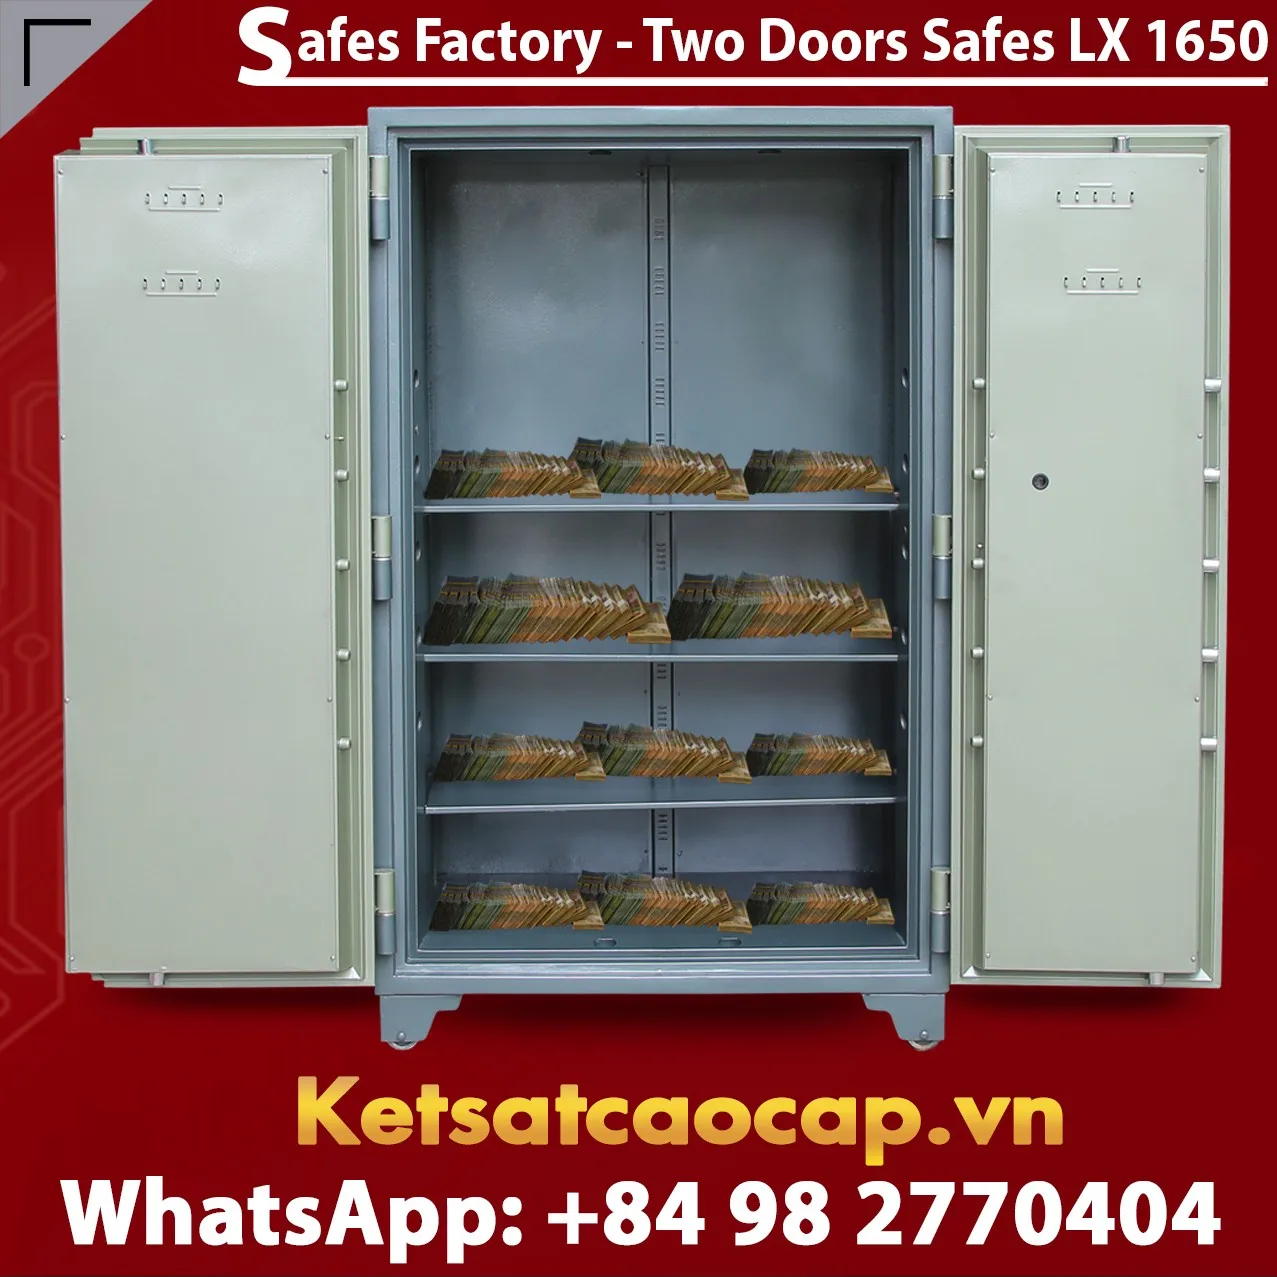 Bank Safes Lx1650 Dk Two Door Best Quality Security Safes - Buy Bank Safes,Fireproof  Bank Safe,Fire Resistant Bank Safes Product on Alibaba.com